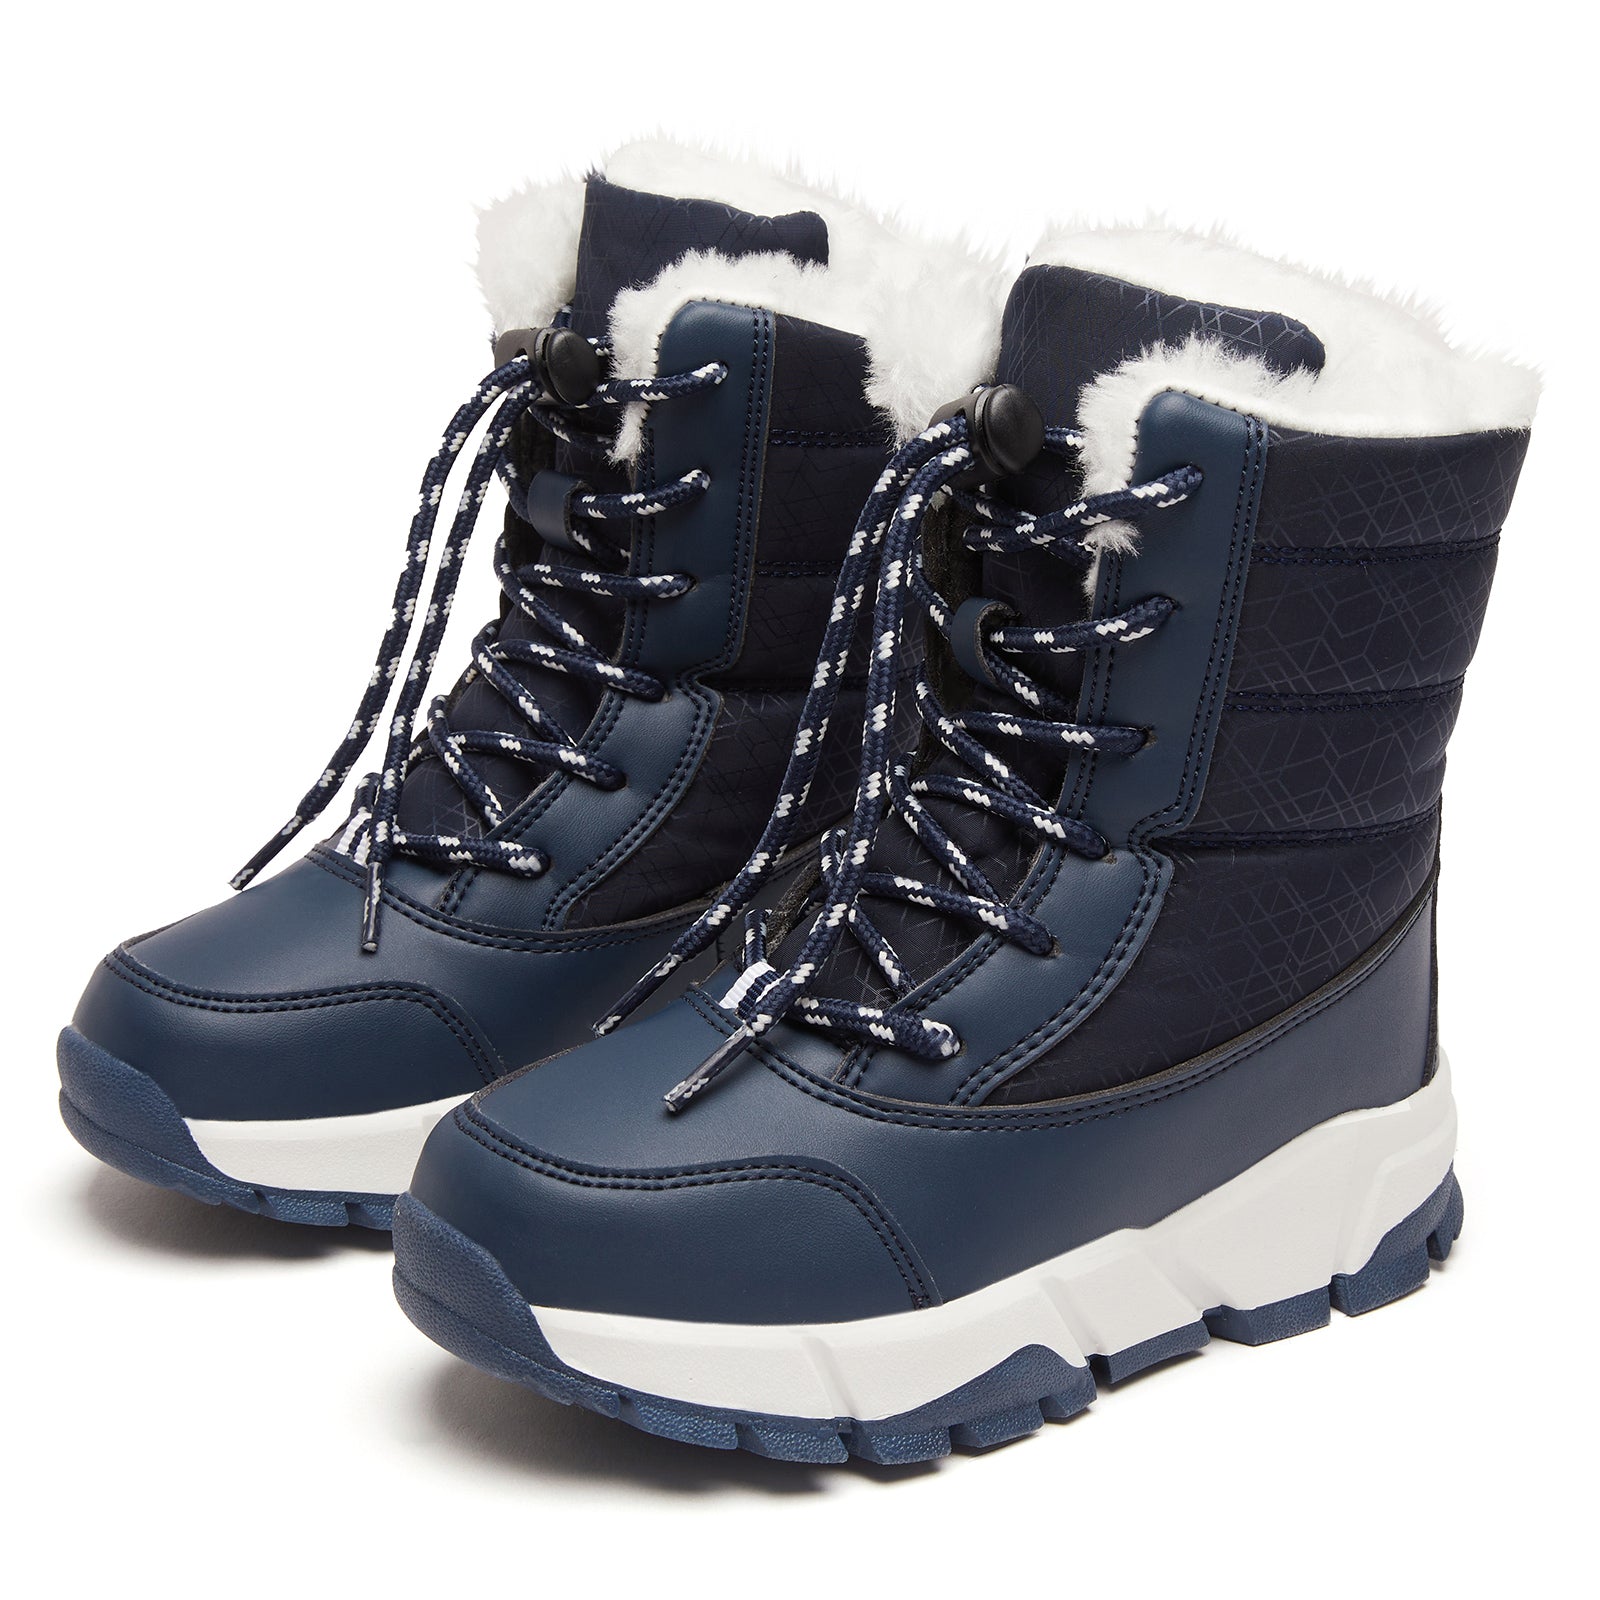 Kids Mid Snow Boots AW7779